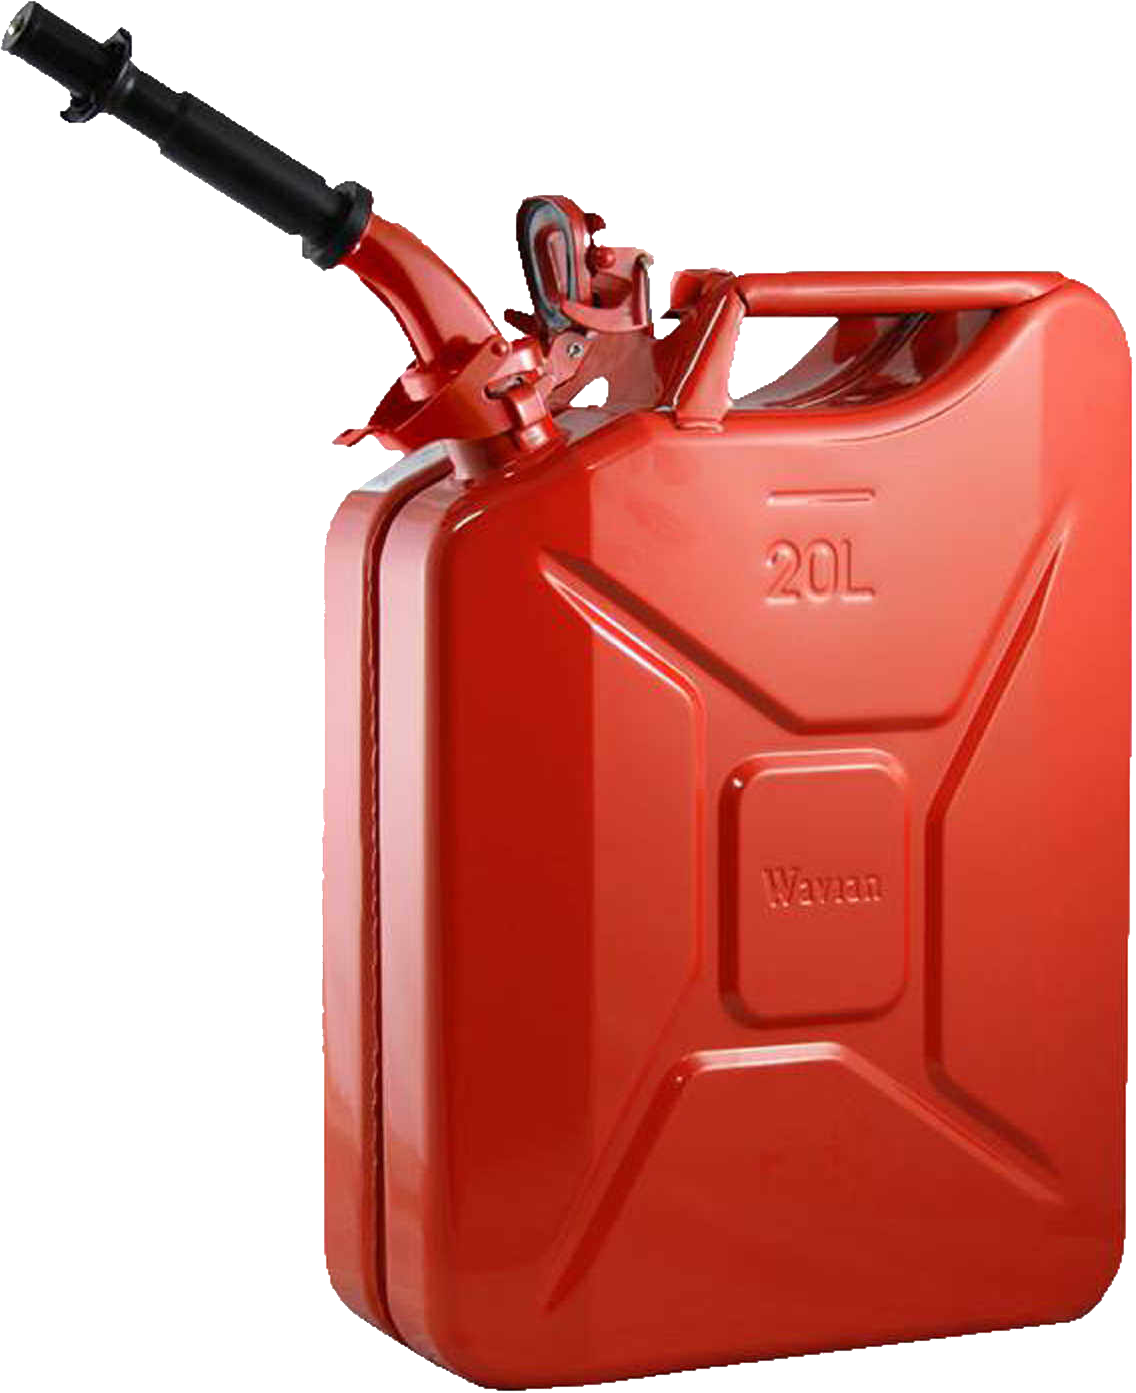 Free vector graphic: Jerrycan